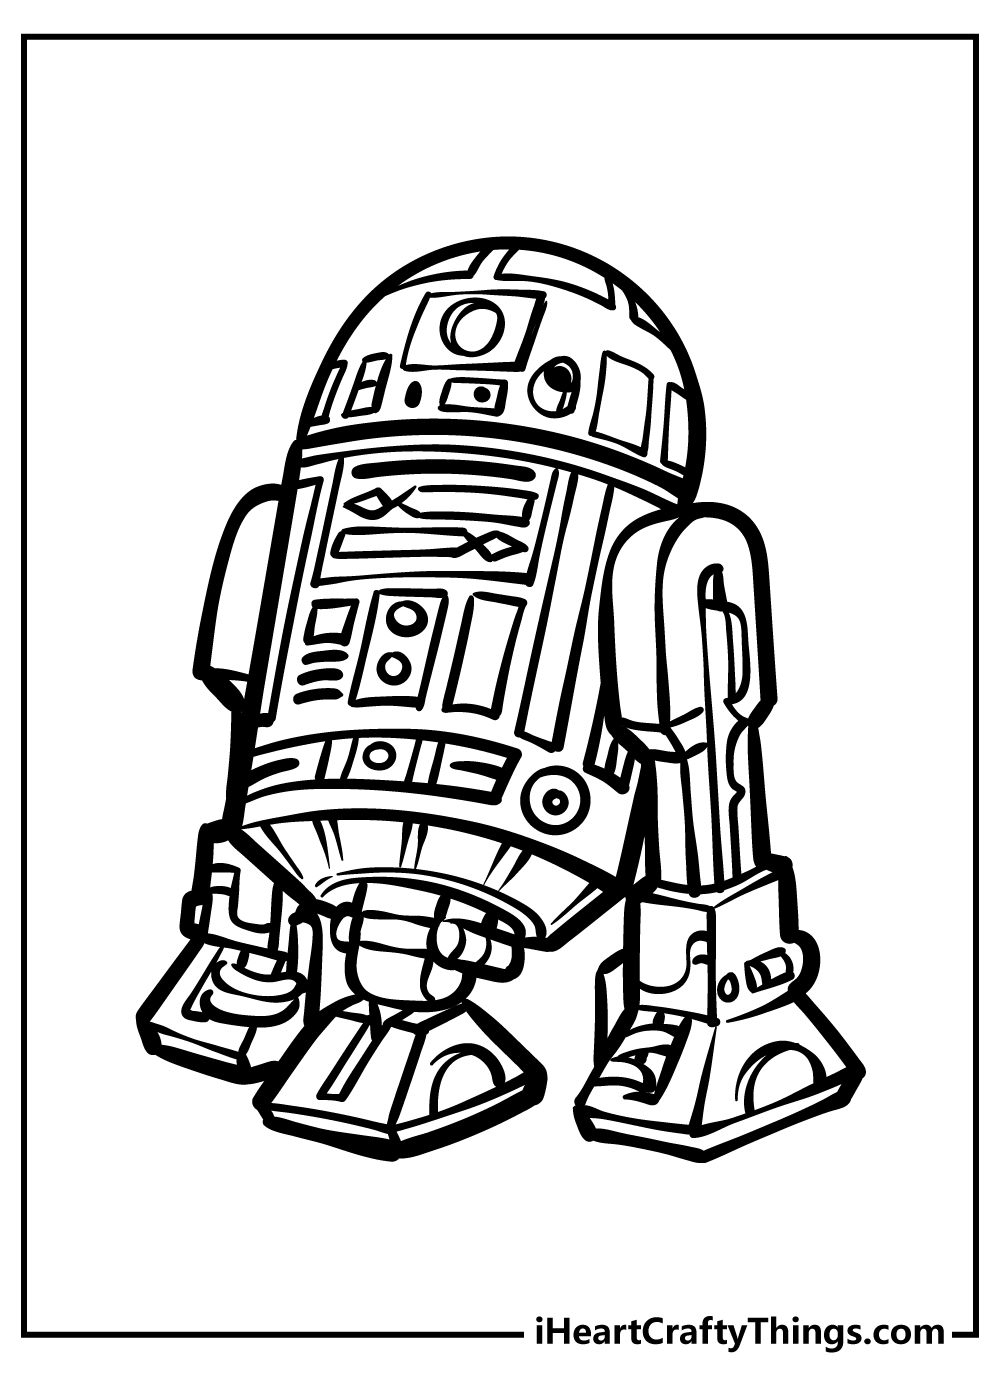 Star Wars Coloring Pages free pdf download